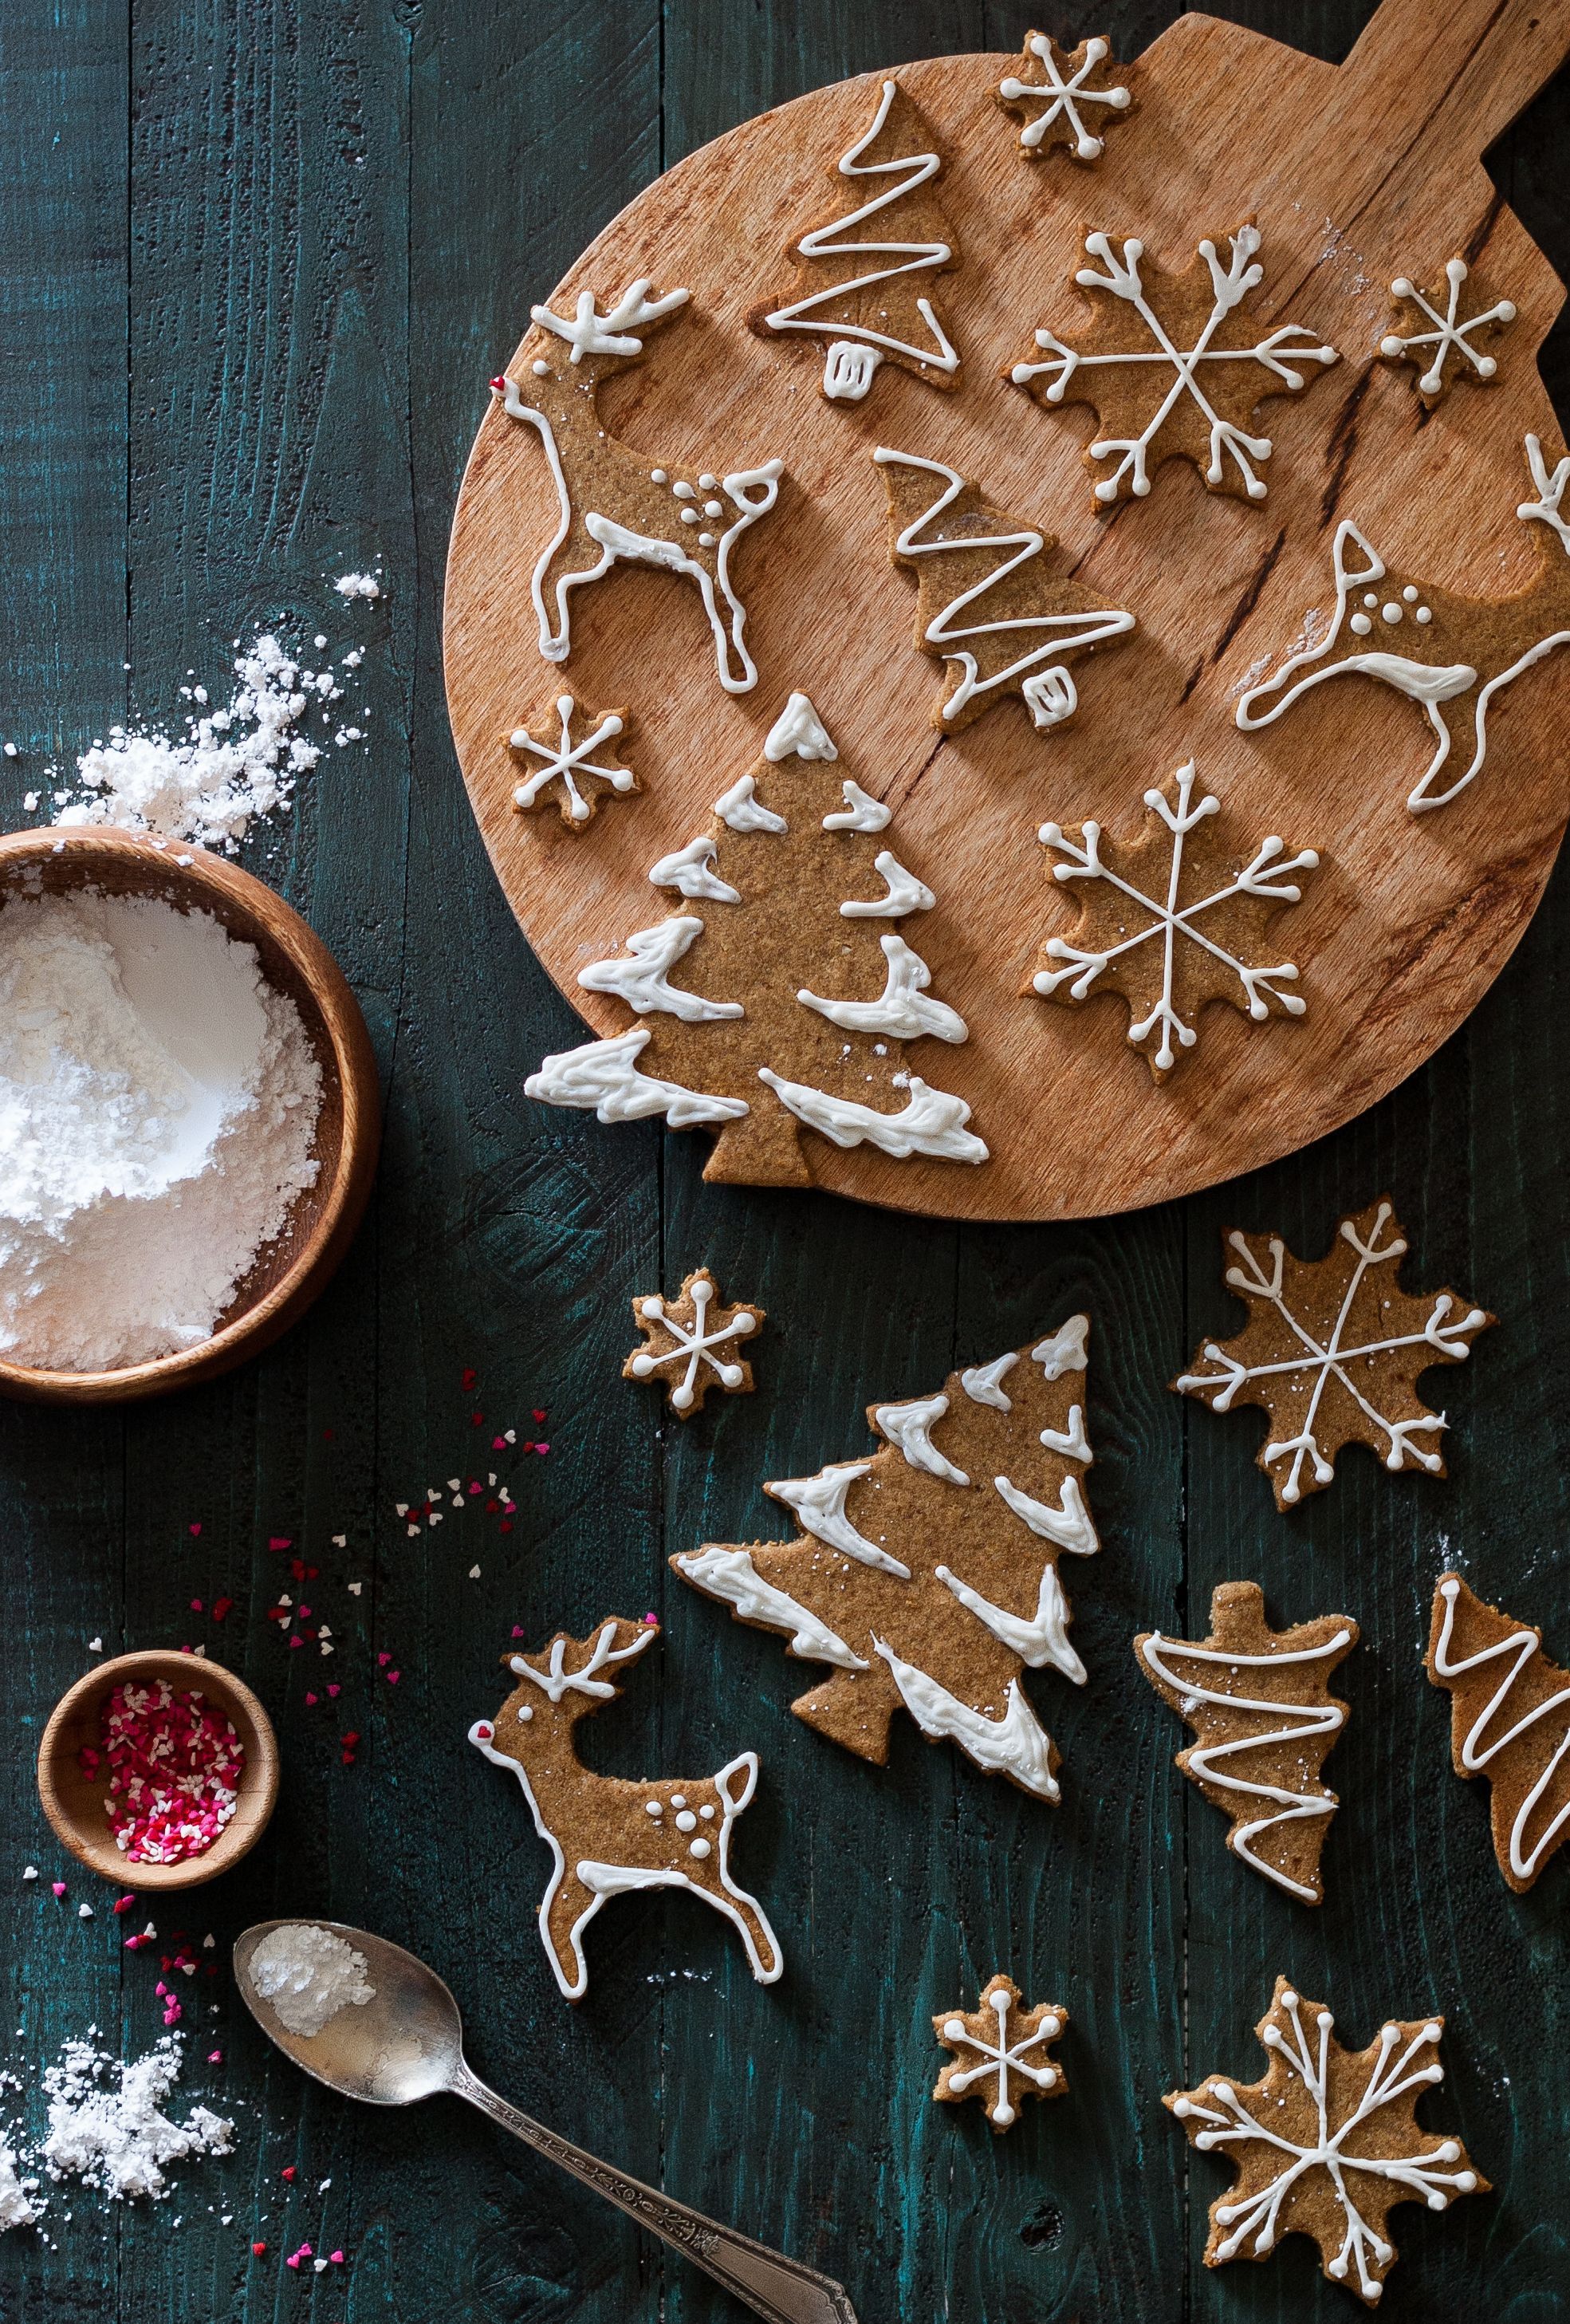 These Old-fashioned Gingerbread Cookies are dairy free, gluten free, refined sugar